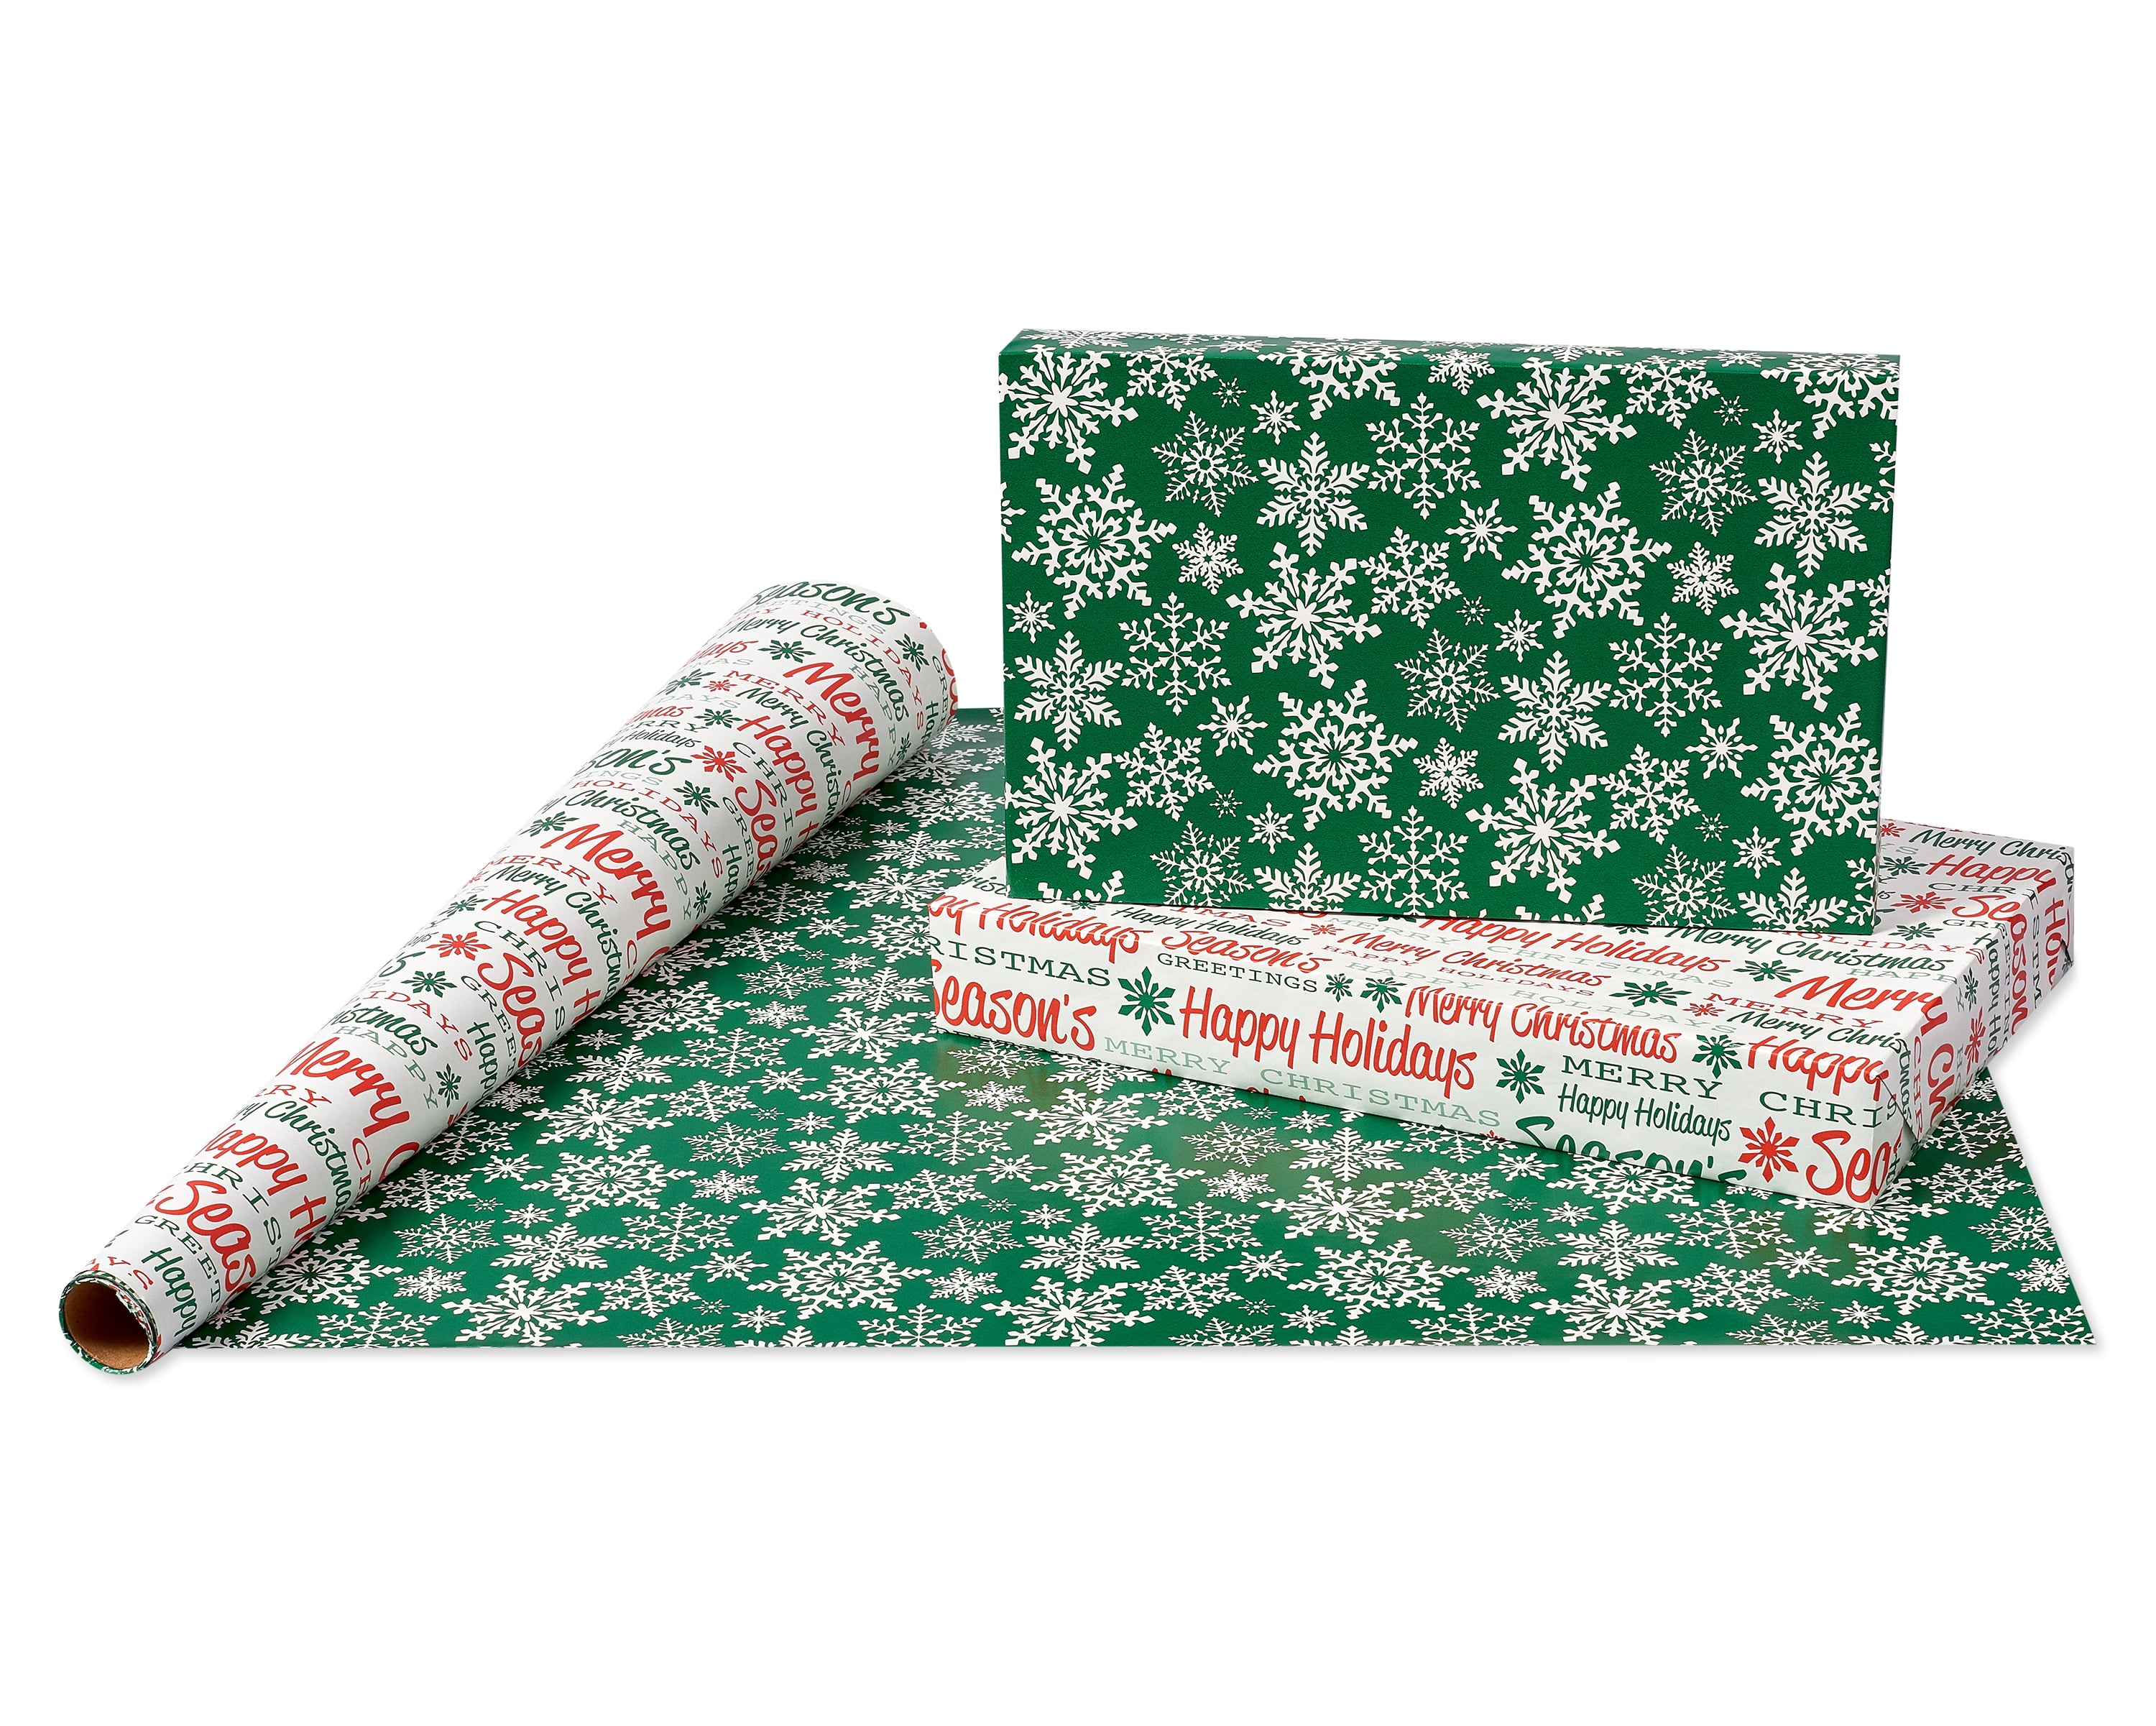  Hill Valley Greetings Vintage Wrapping Paper